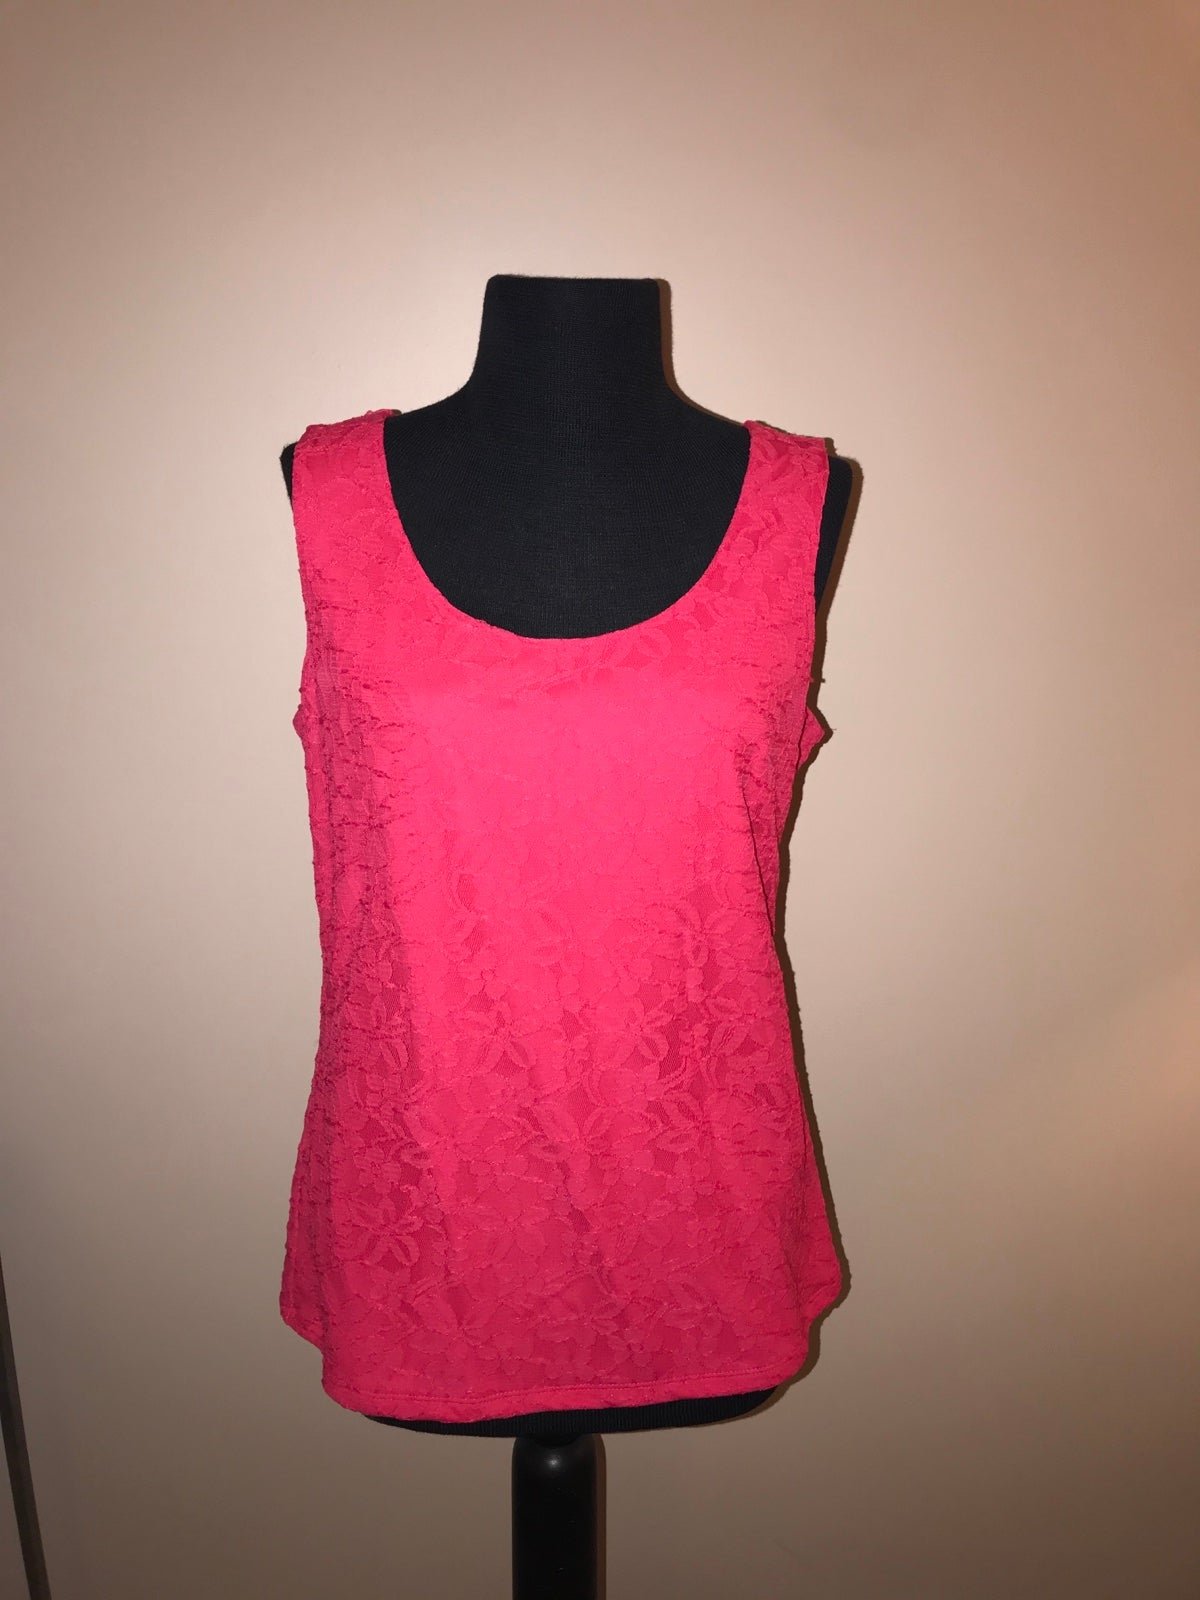 Great Dana Buchman pink lace overlay top size S gh1zKEd